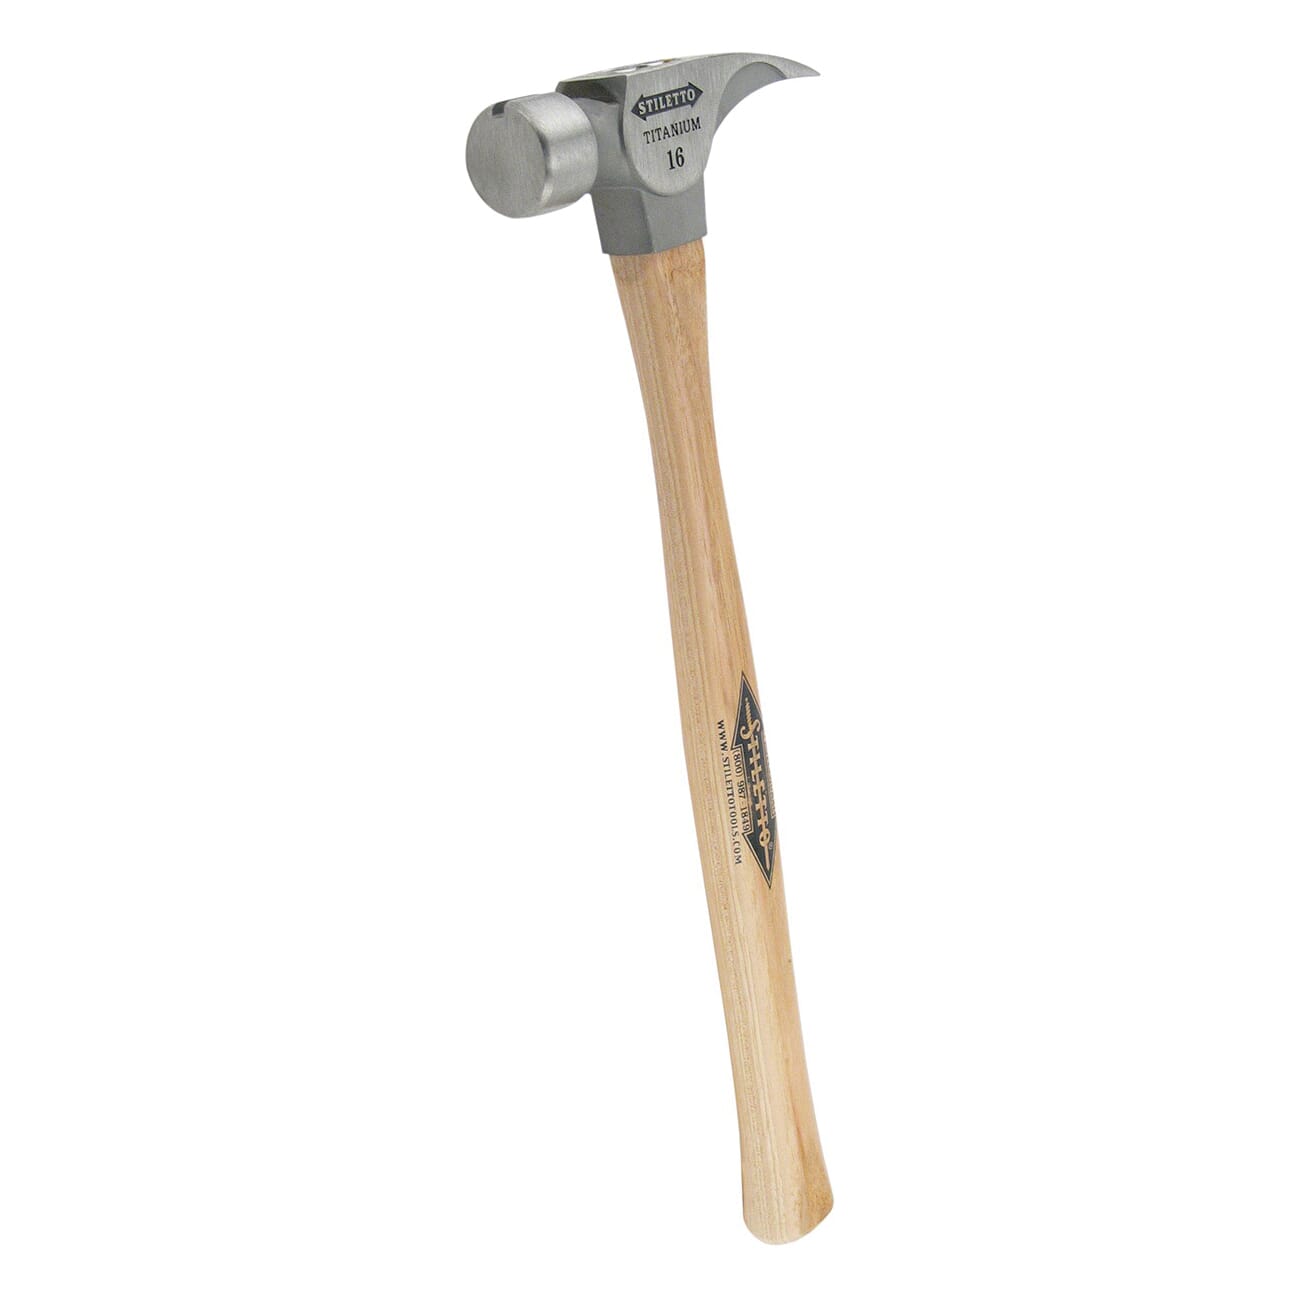 Stiletto® TI16SS Lightweight Framing Hammer, 18 in OAL, Smooth Surface, 16 oz Titanium Head, Straight Claw, Hickory Wood Handle